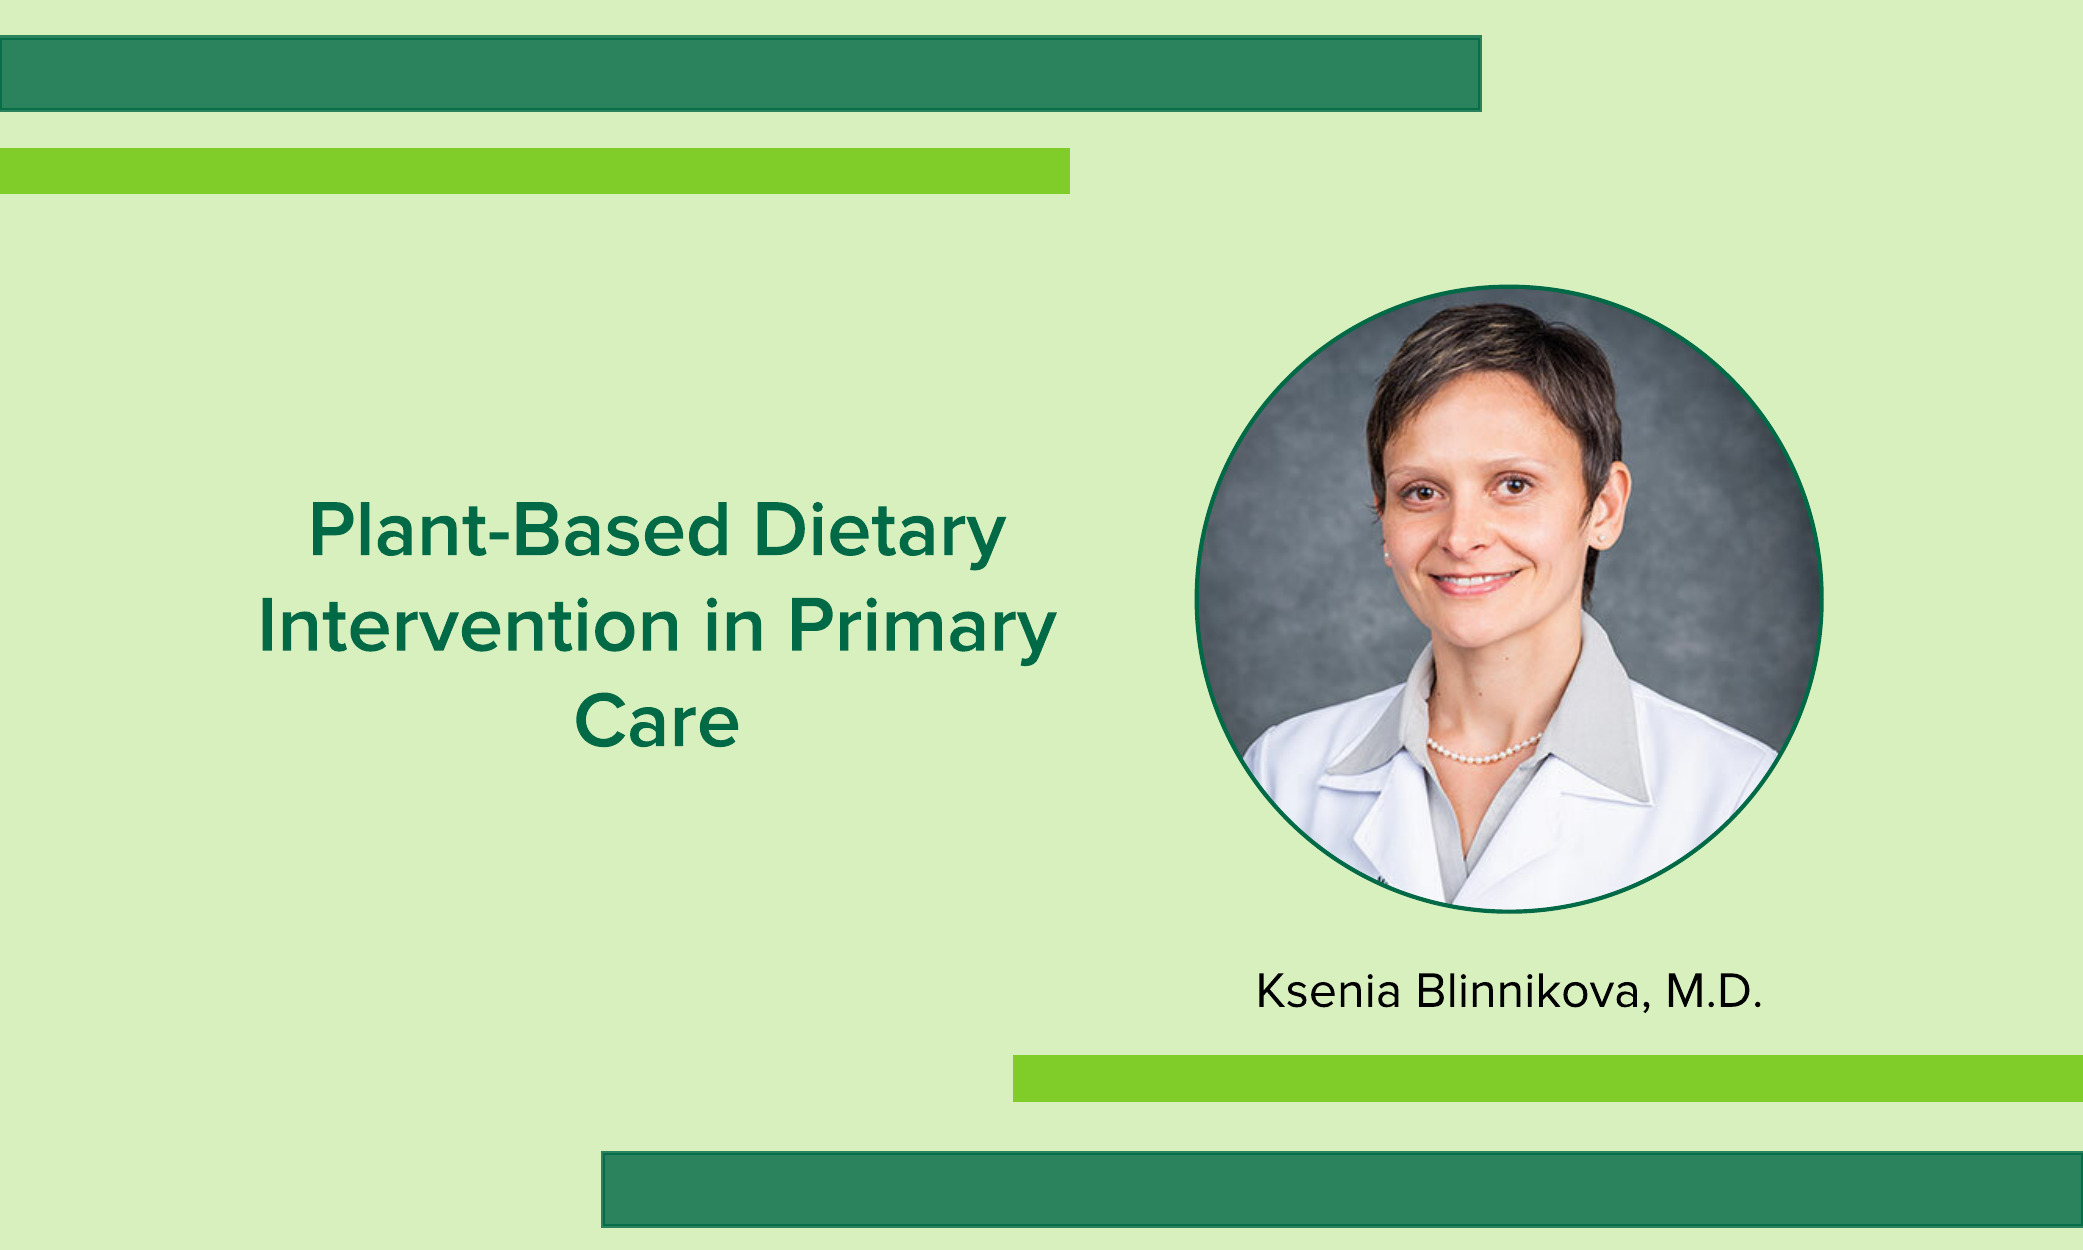 Plant-Based Dietary Intervention in Primary Care